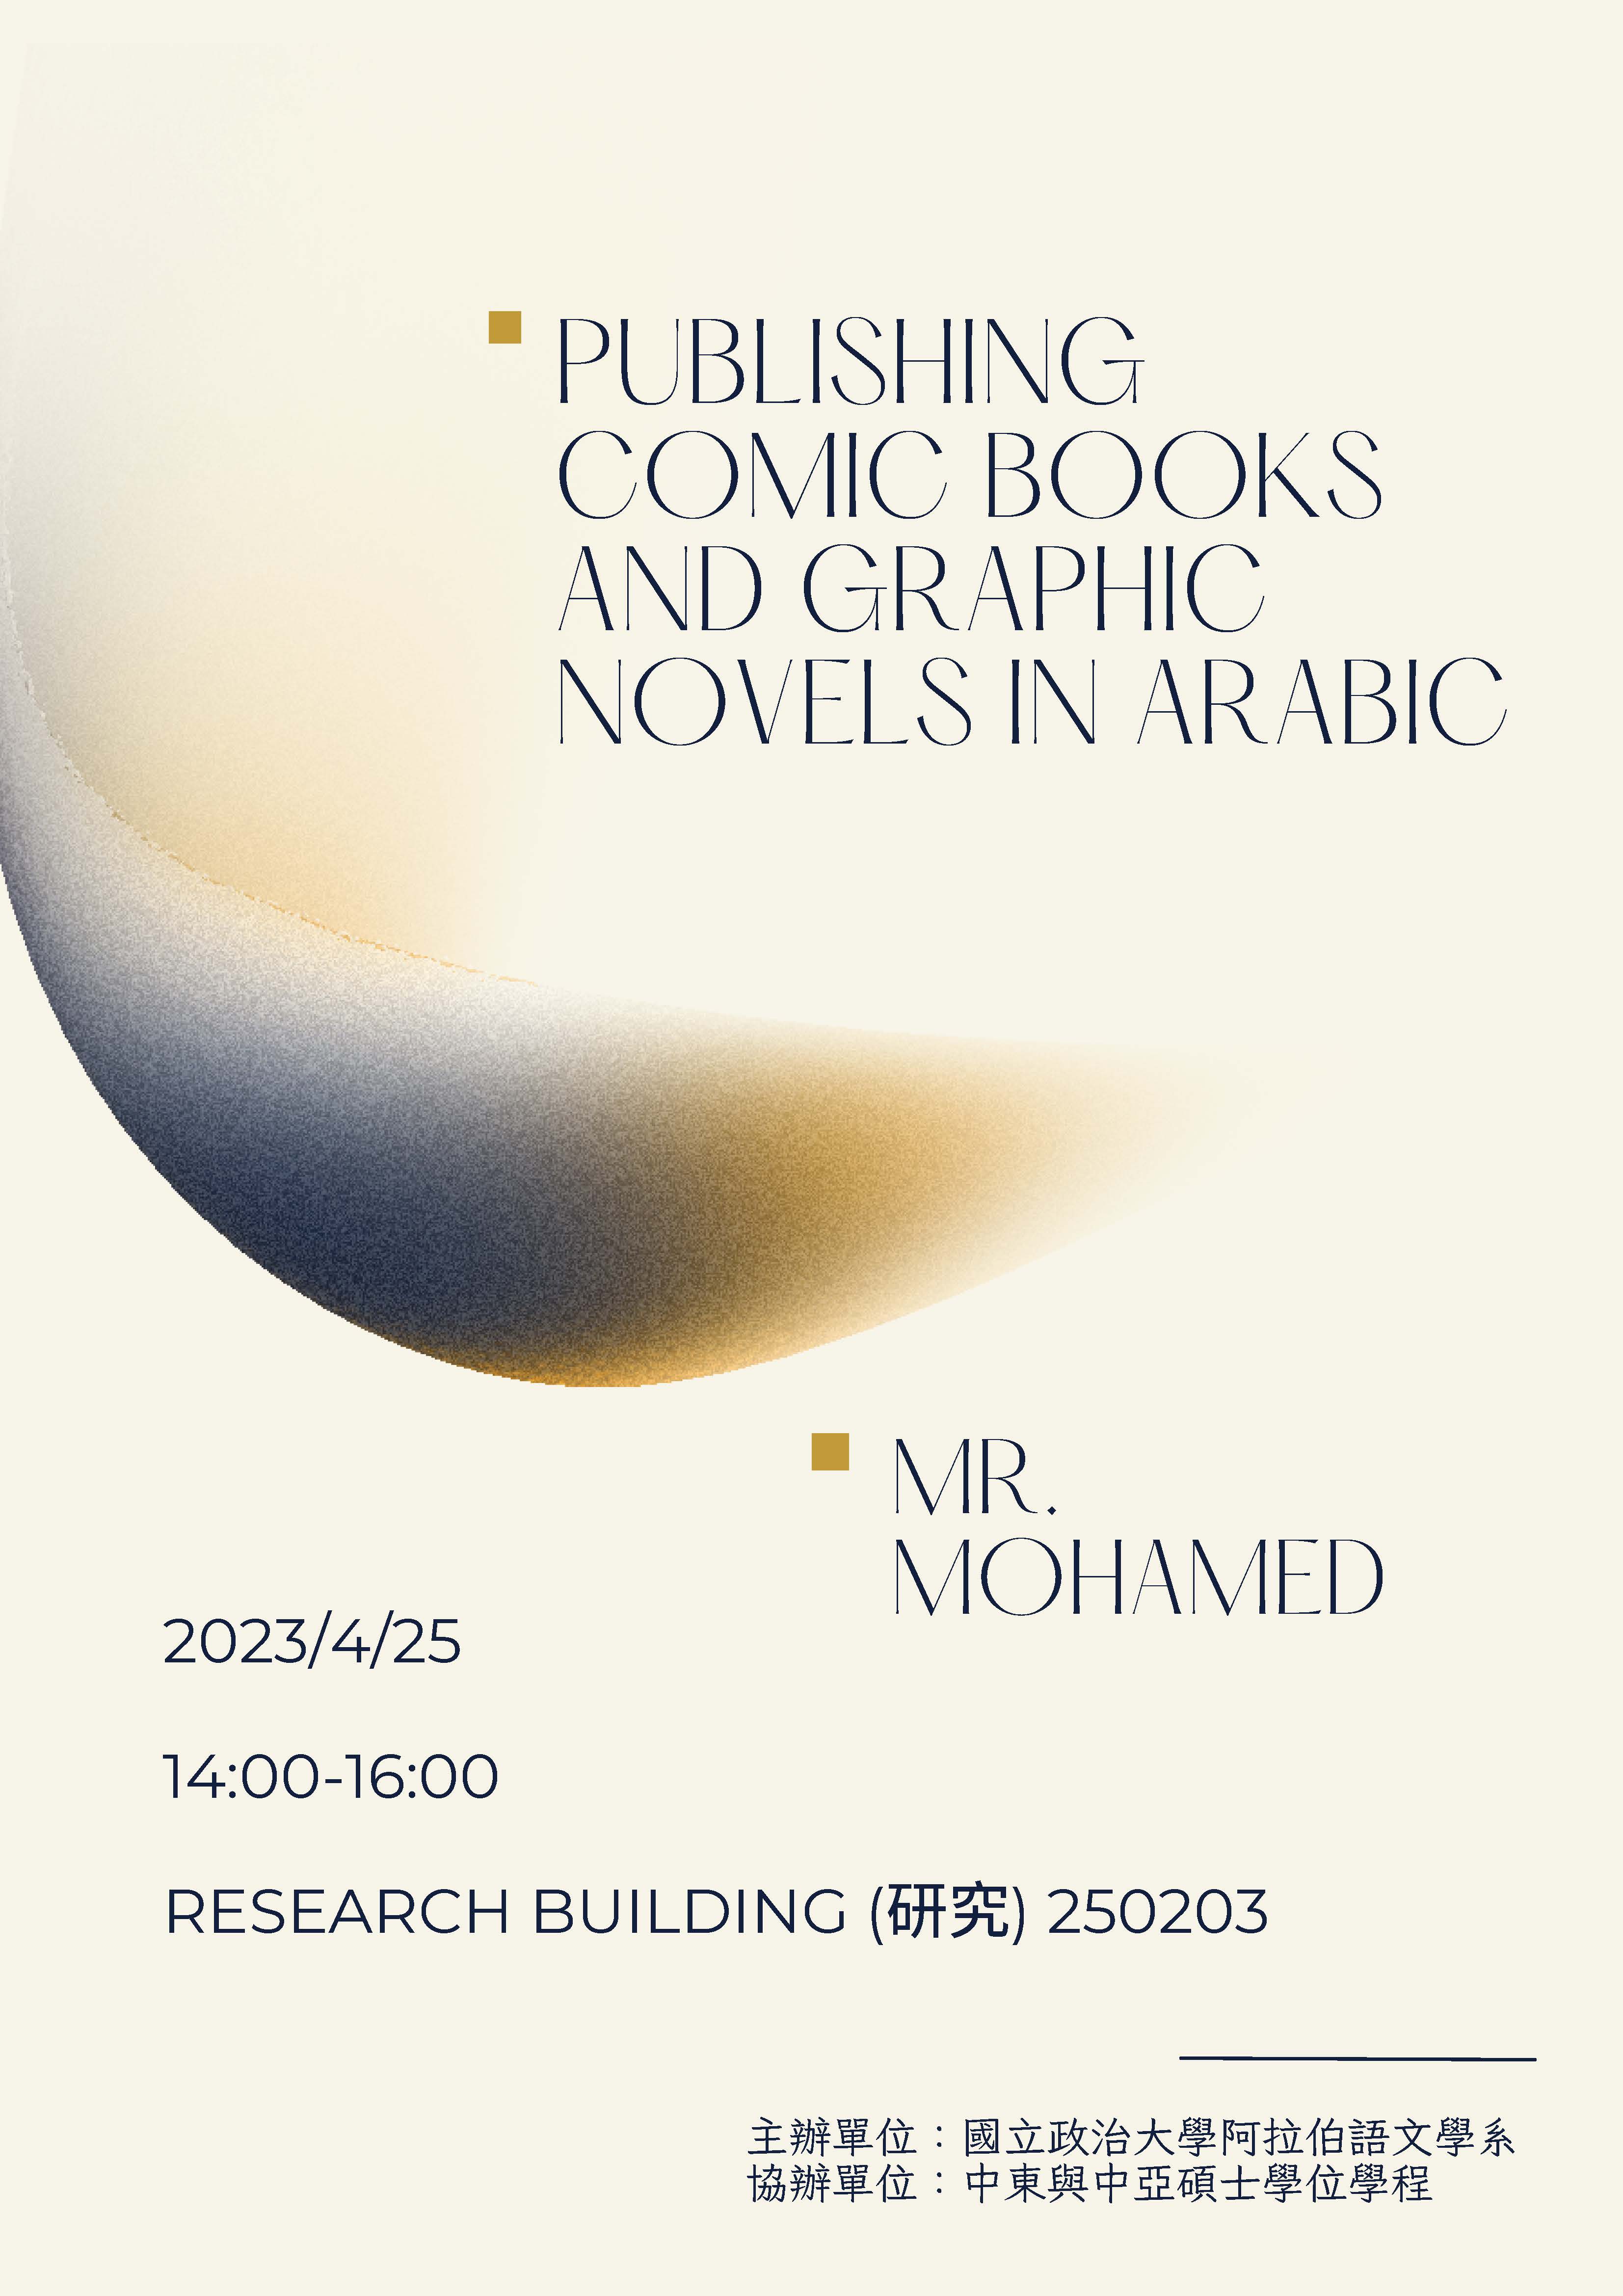 English Lectures《Publishing comic books and graphic novels in Arabic》